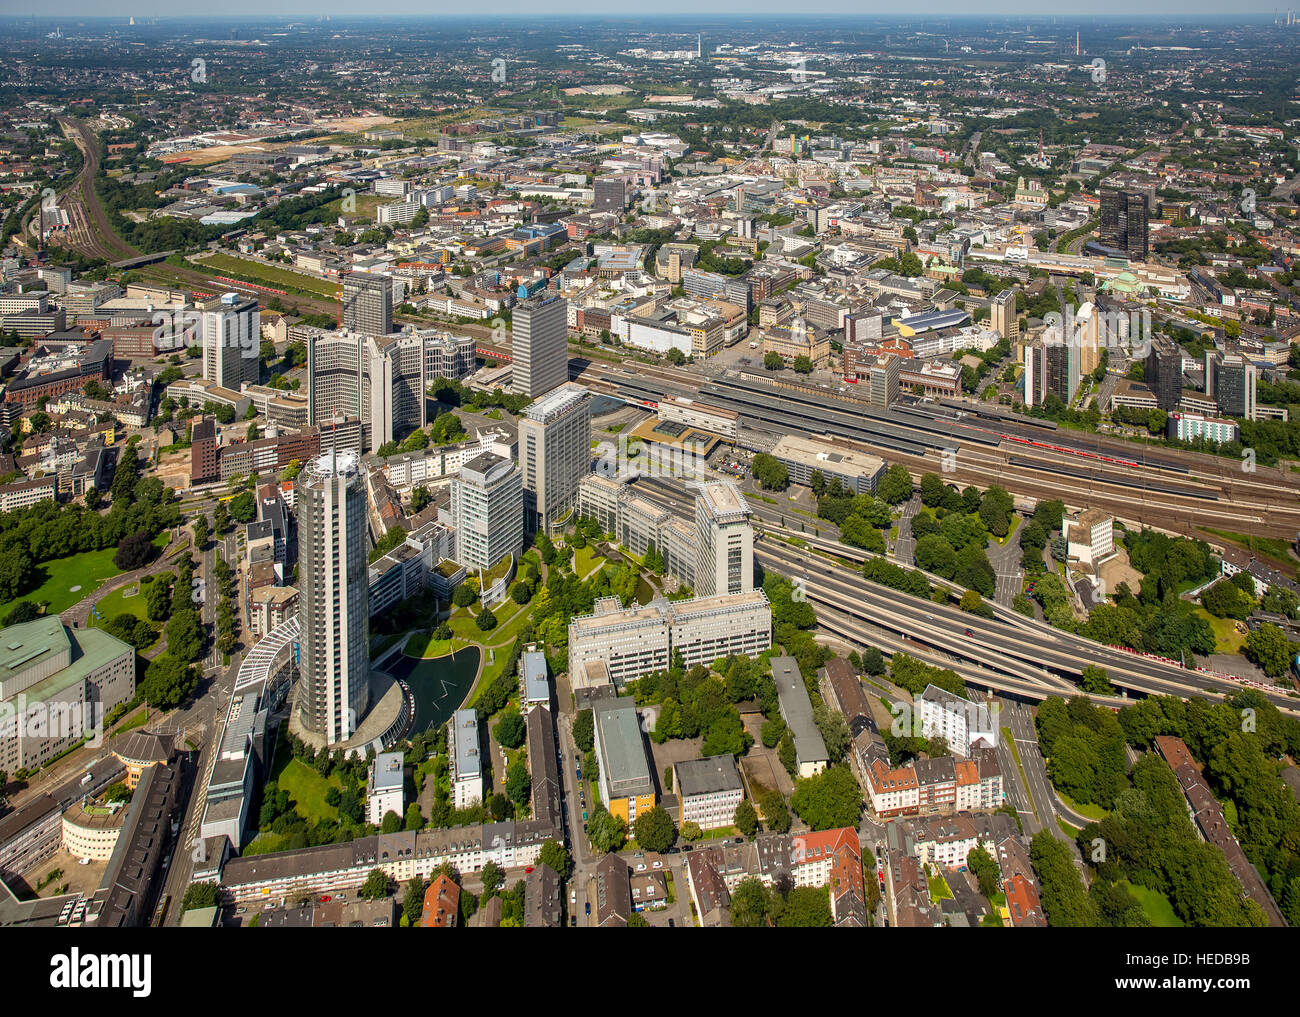 Aerial view of skyline with RWE skyscraper, Evonik headquarters, central station, DB-Tower, Essen Mitte, Ruhr District Stock Photo